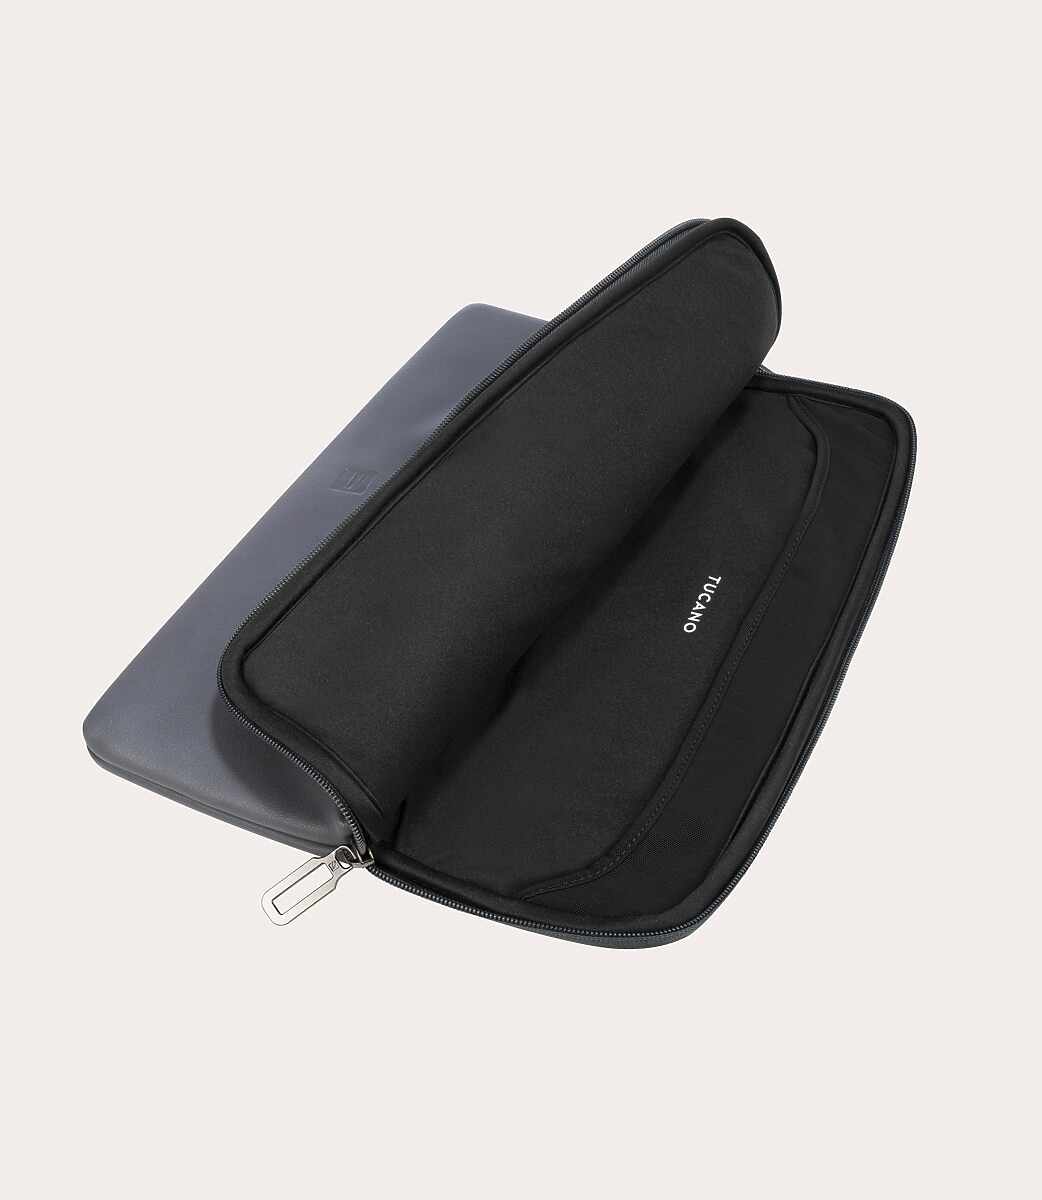 Tucano Sleeve for Laptop 12" and MacBook up to 14"